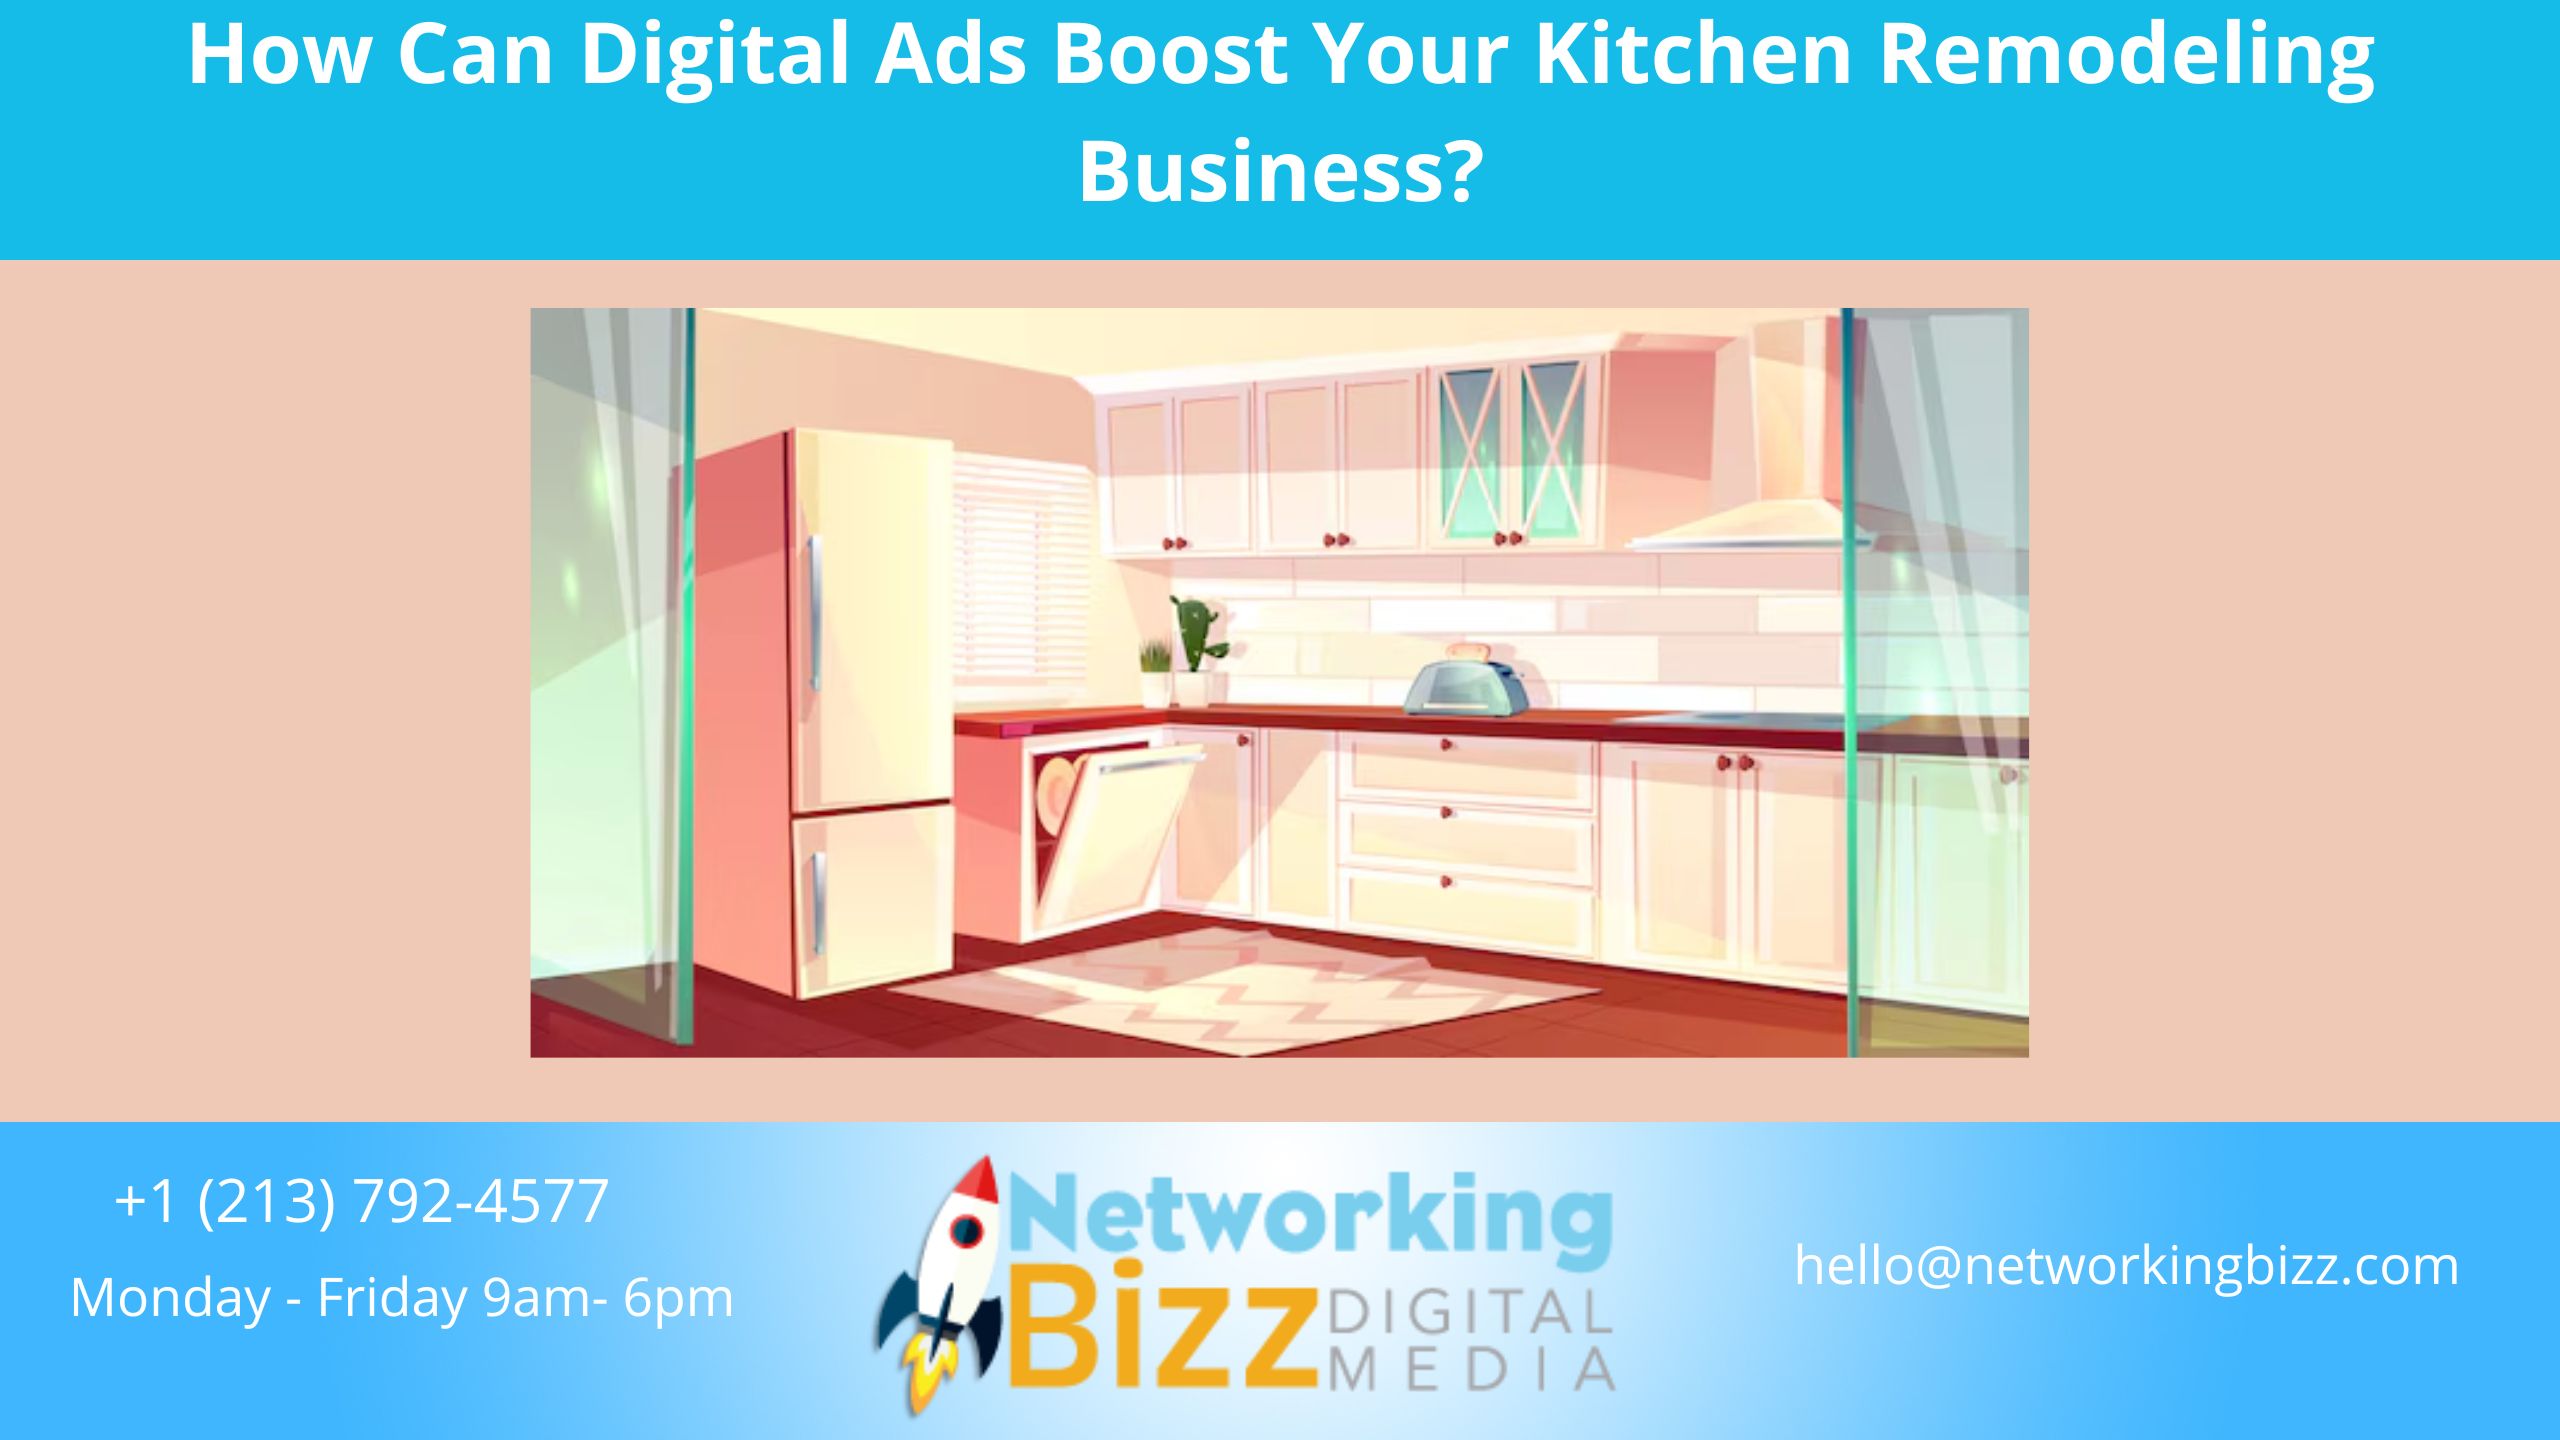 How Can Digital Ads Boost Your Kitchen Remodeling Business?